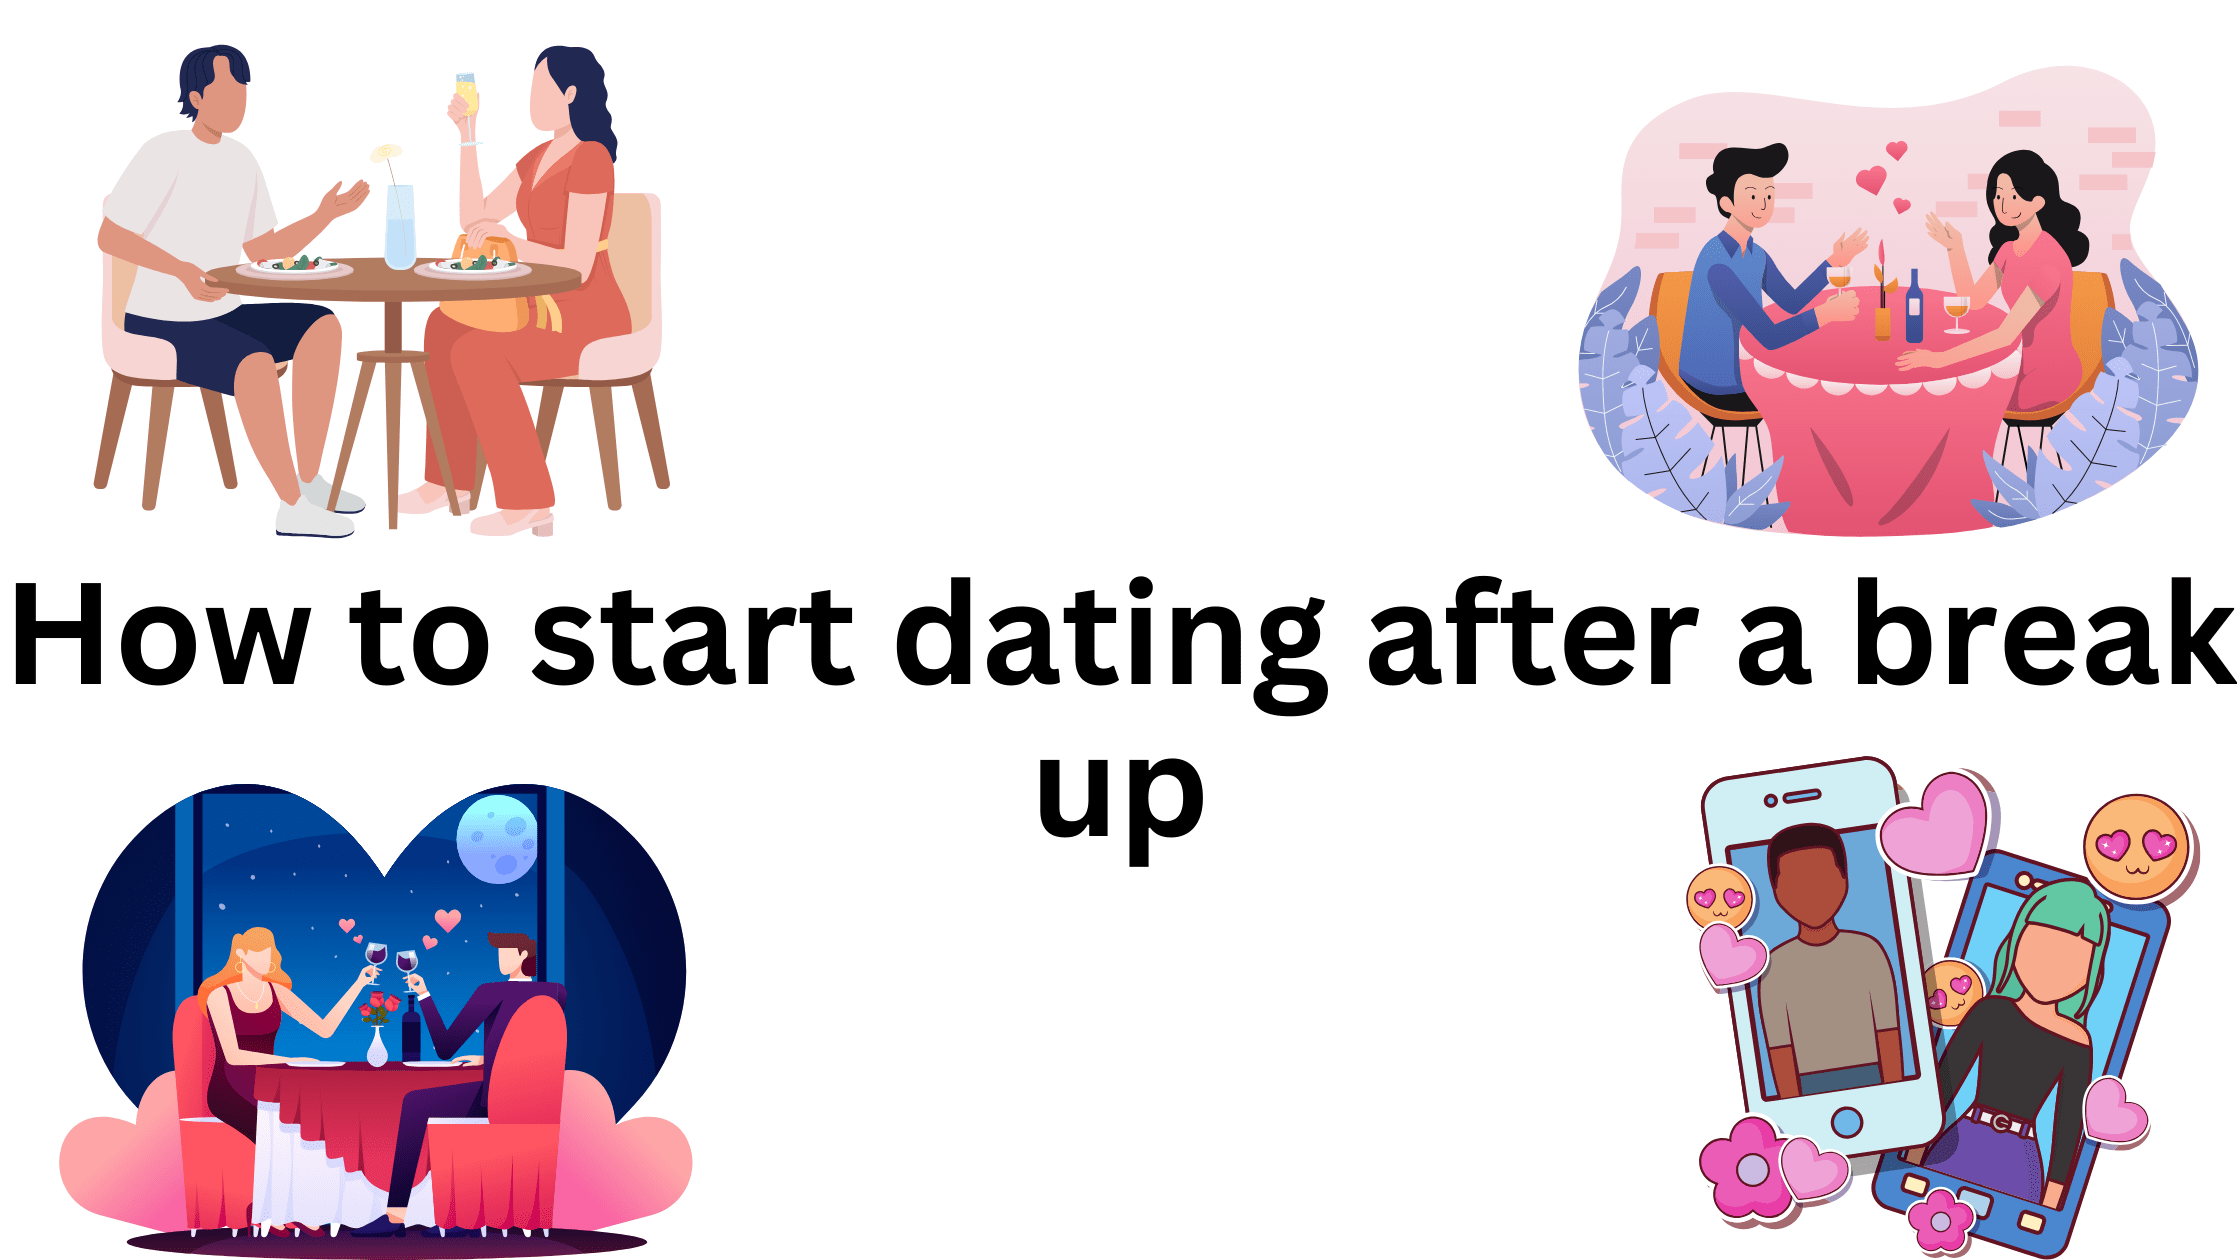 10 Great Ways to Start Dating After a Break Up 35